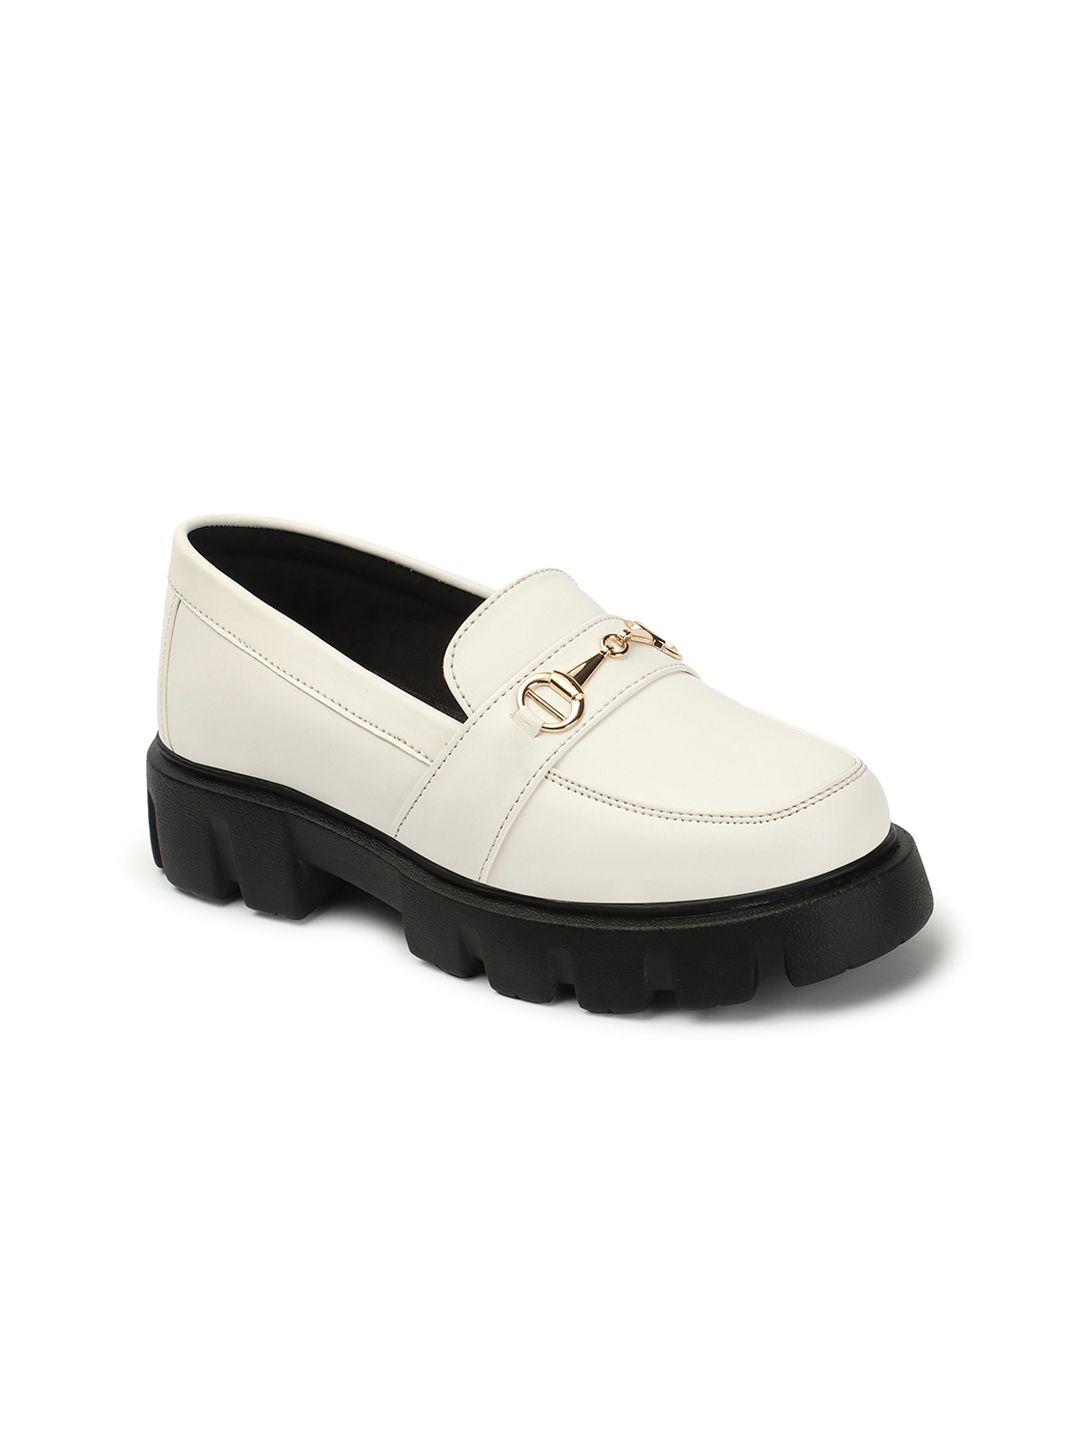 the roadster lifestyle co. women white & black buckled lightweight horsebit loafers